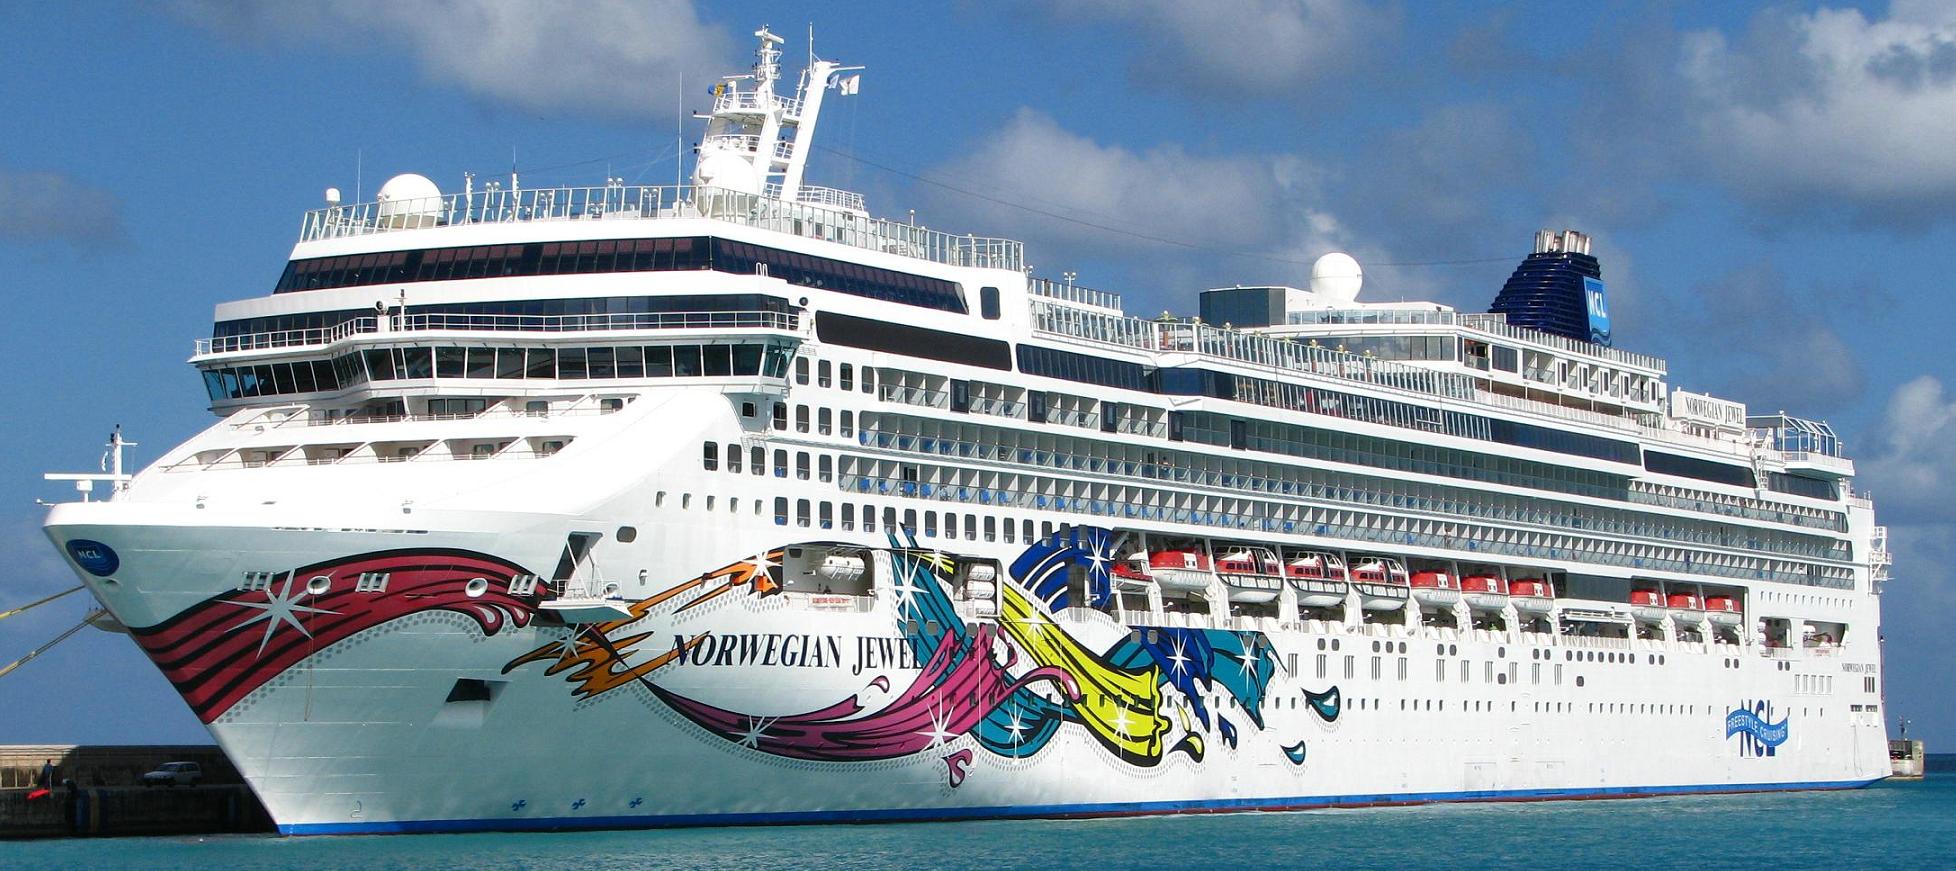 The Jewel in the crown - Norwegian Cruise Lines sends ships